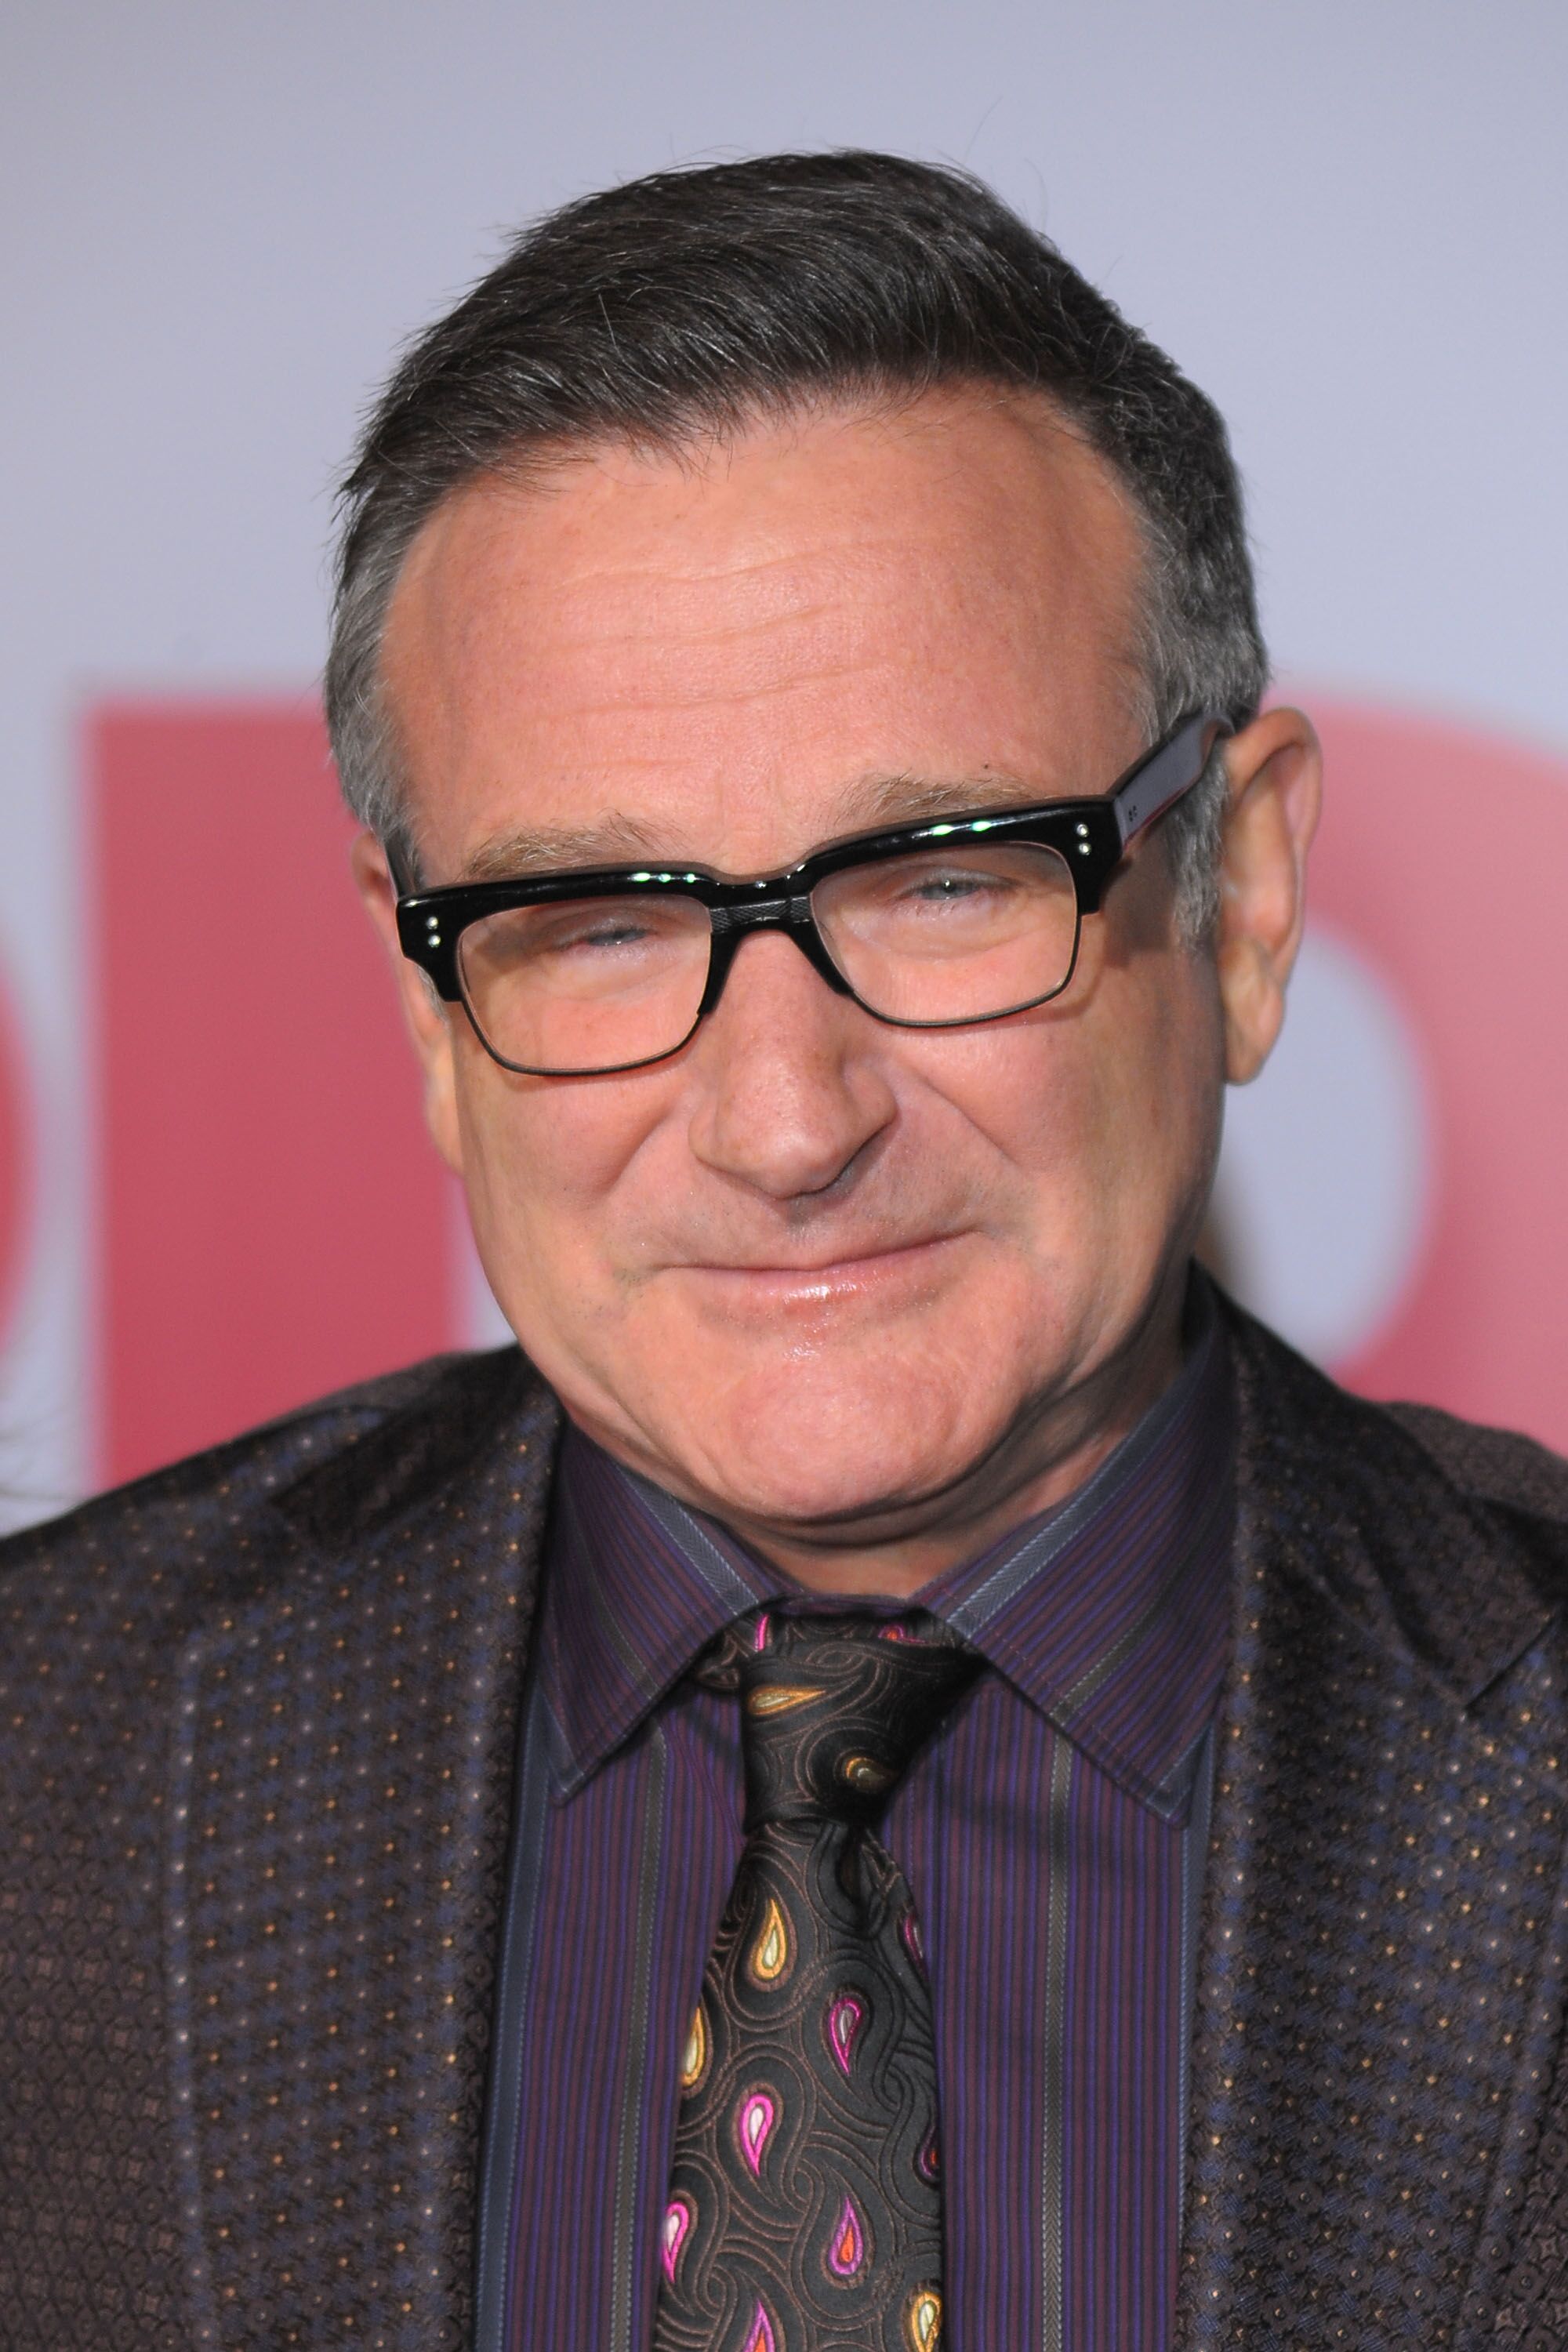 Robin Williams arrives at the premiere of "Old Dogs." | Source: Getty Images